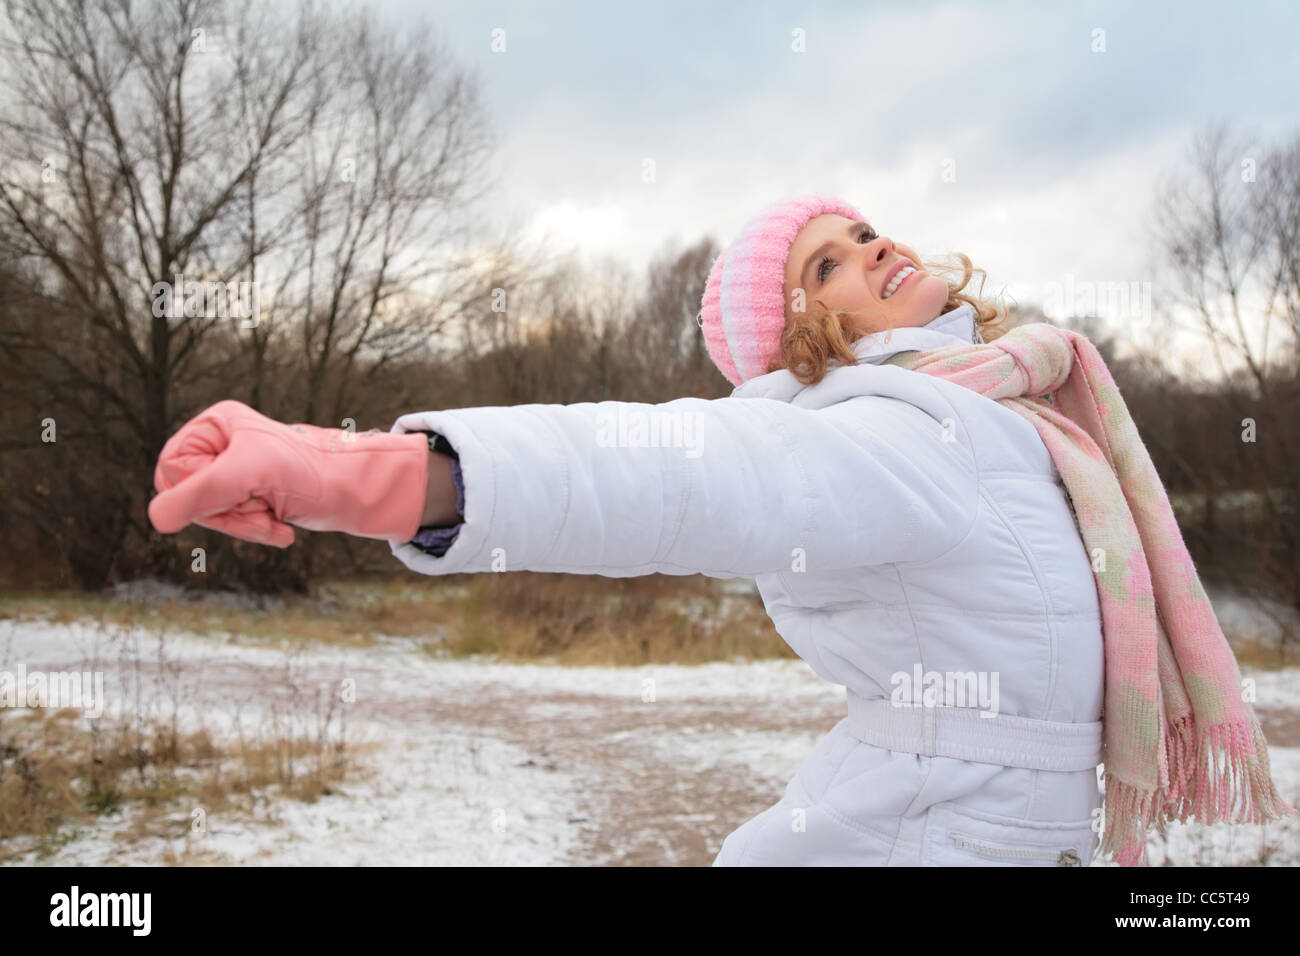 young beauty girl in wood in winter with stretched hands Stock Photo